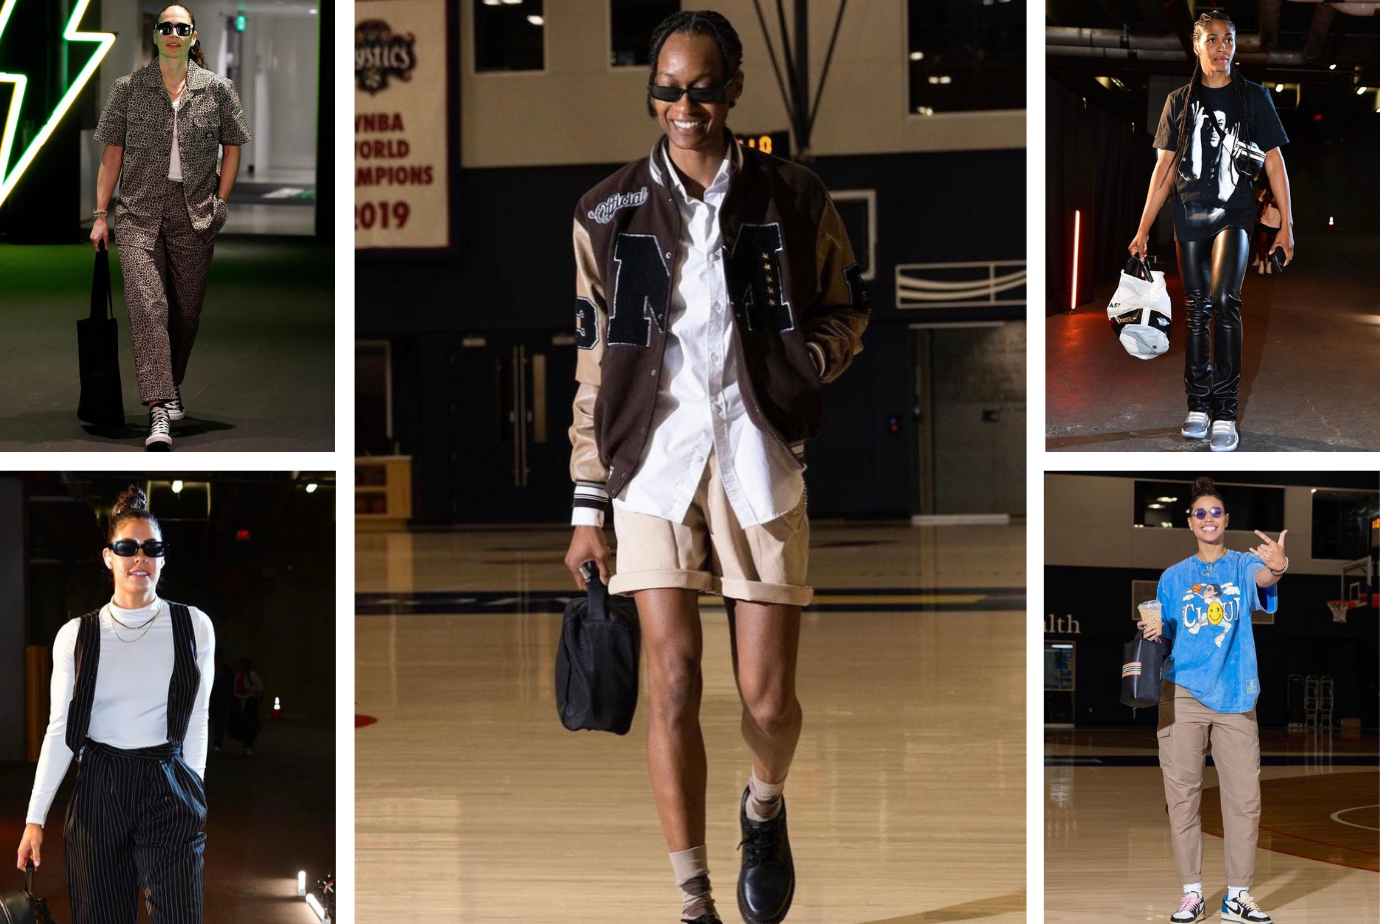 The NBA Player's Guide to Extremely Stylish Accessories